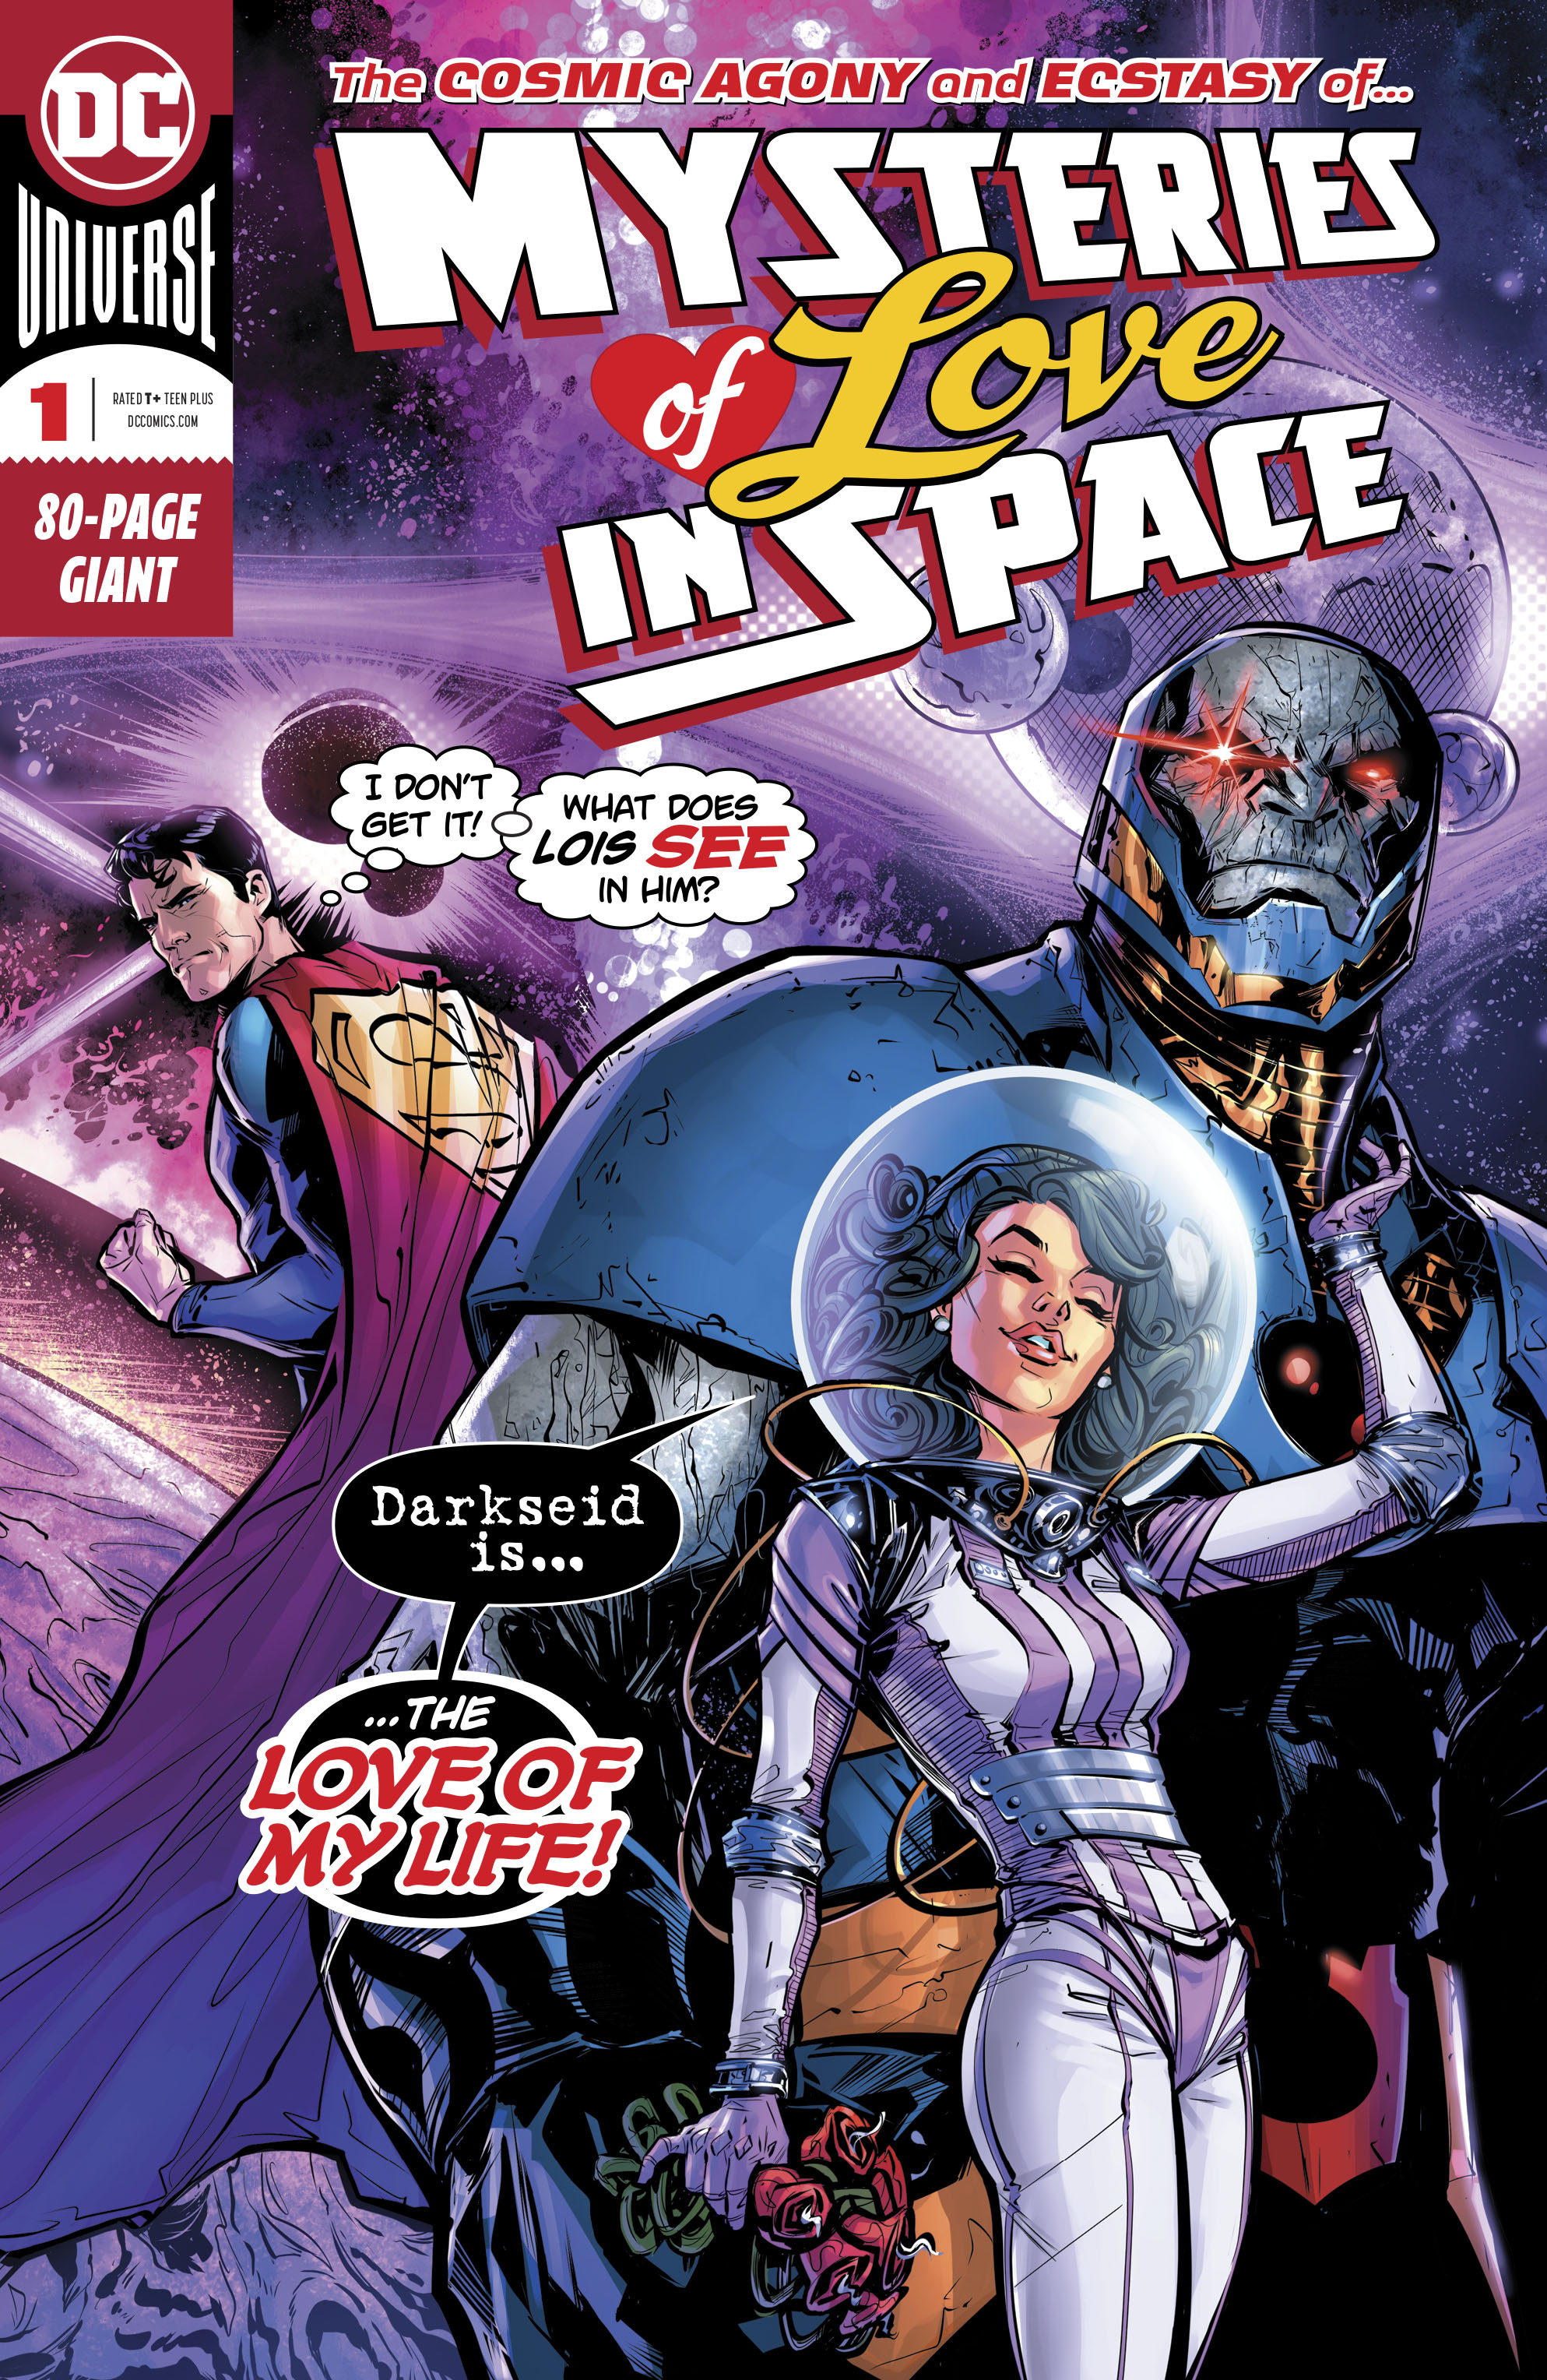 Read online Mysteries of Love in Space comic -  Issue # Full - 1